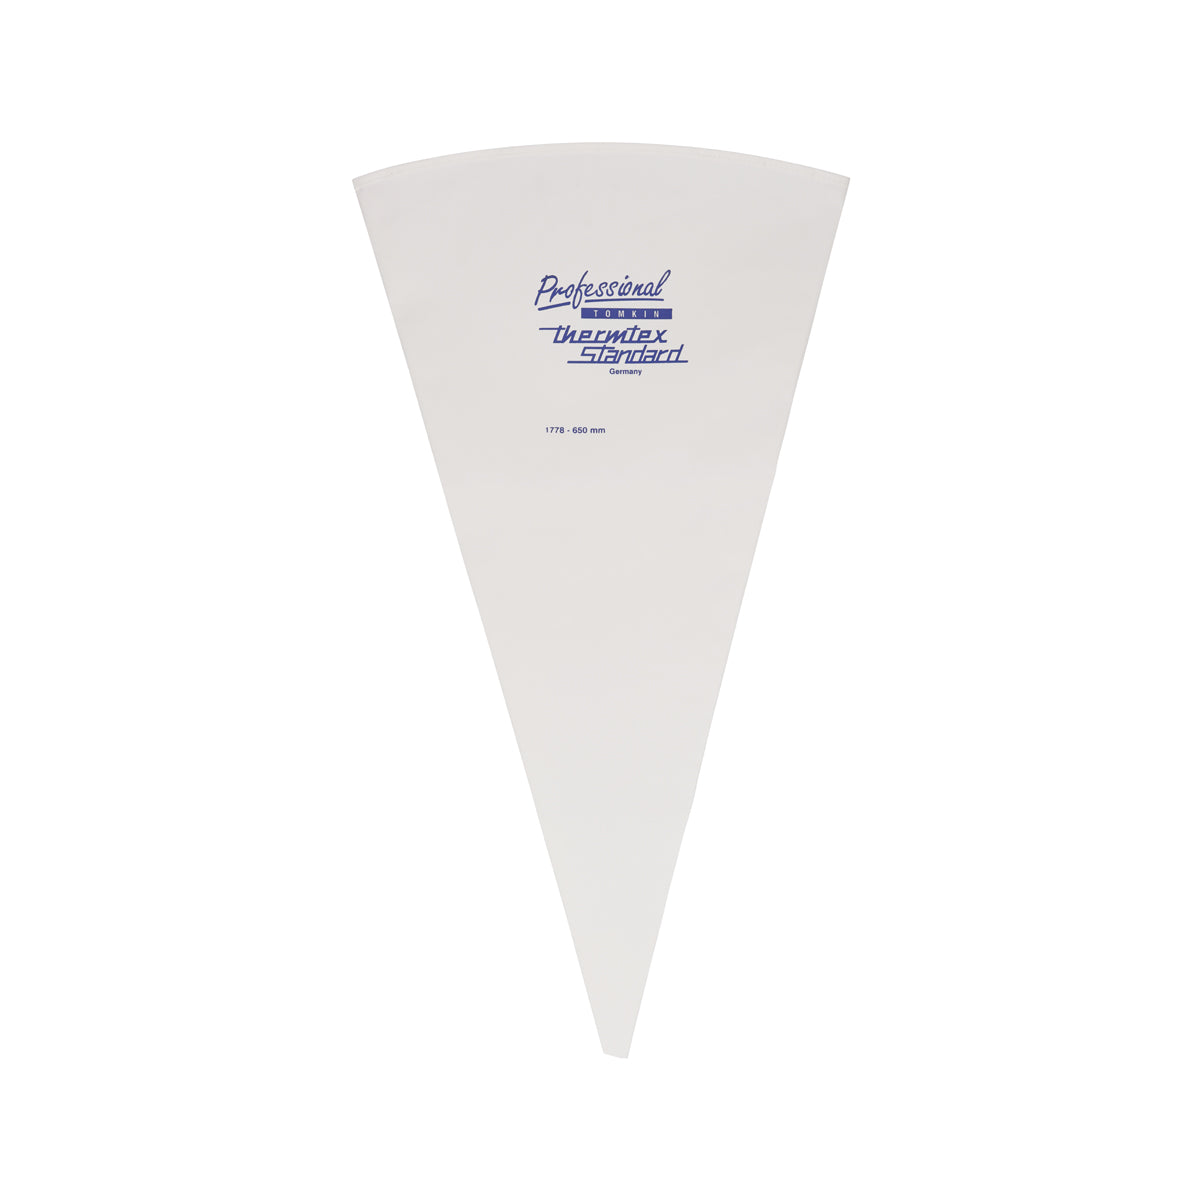 01778 Thermohauser Standard Pastry Bag 650mm Tomkin Australia Hospitality Supplies